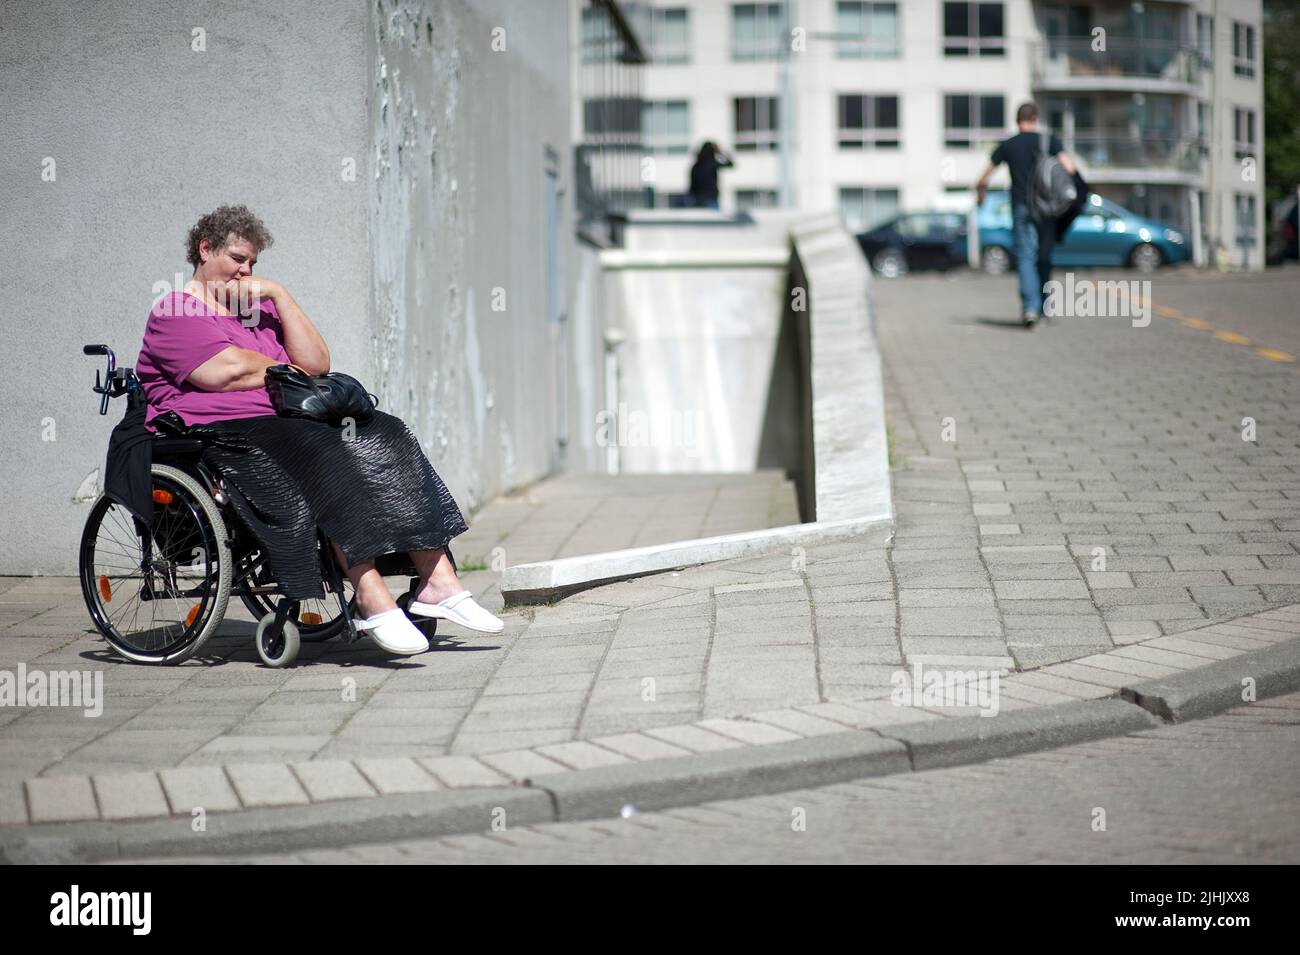 Rotterdam, Netherlands. Handicapped Woman in Wheel Chair sitting down at a sunny sport on the sidewalk during a warm, spring day. Stock Photo